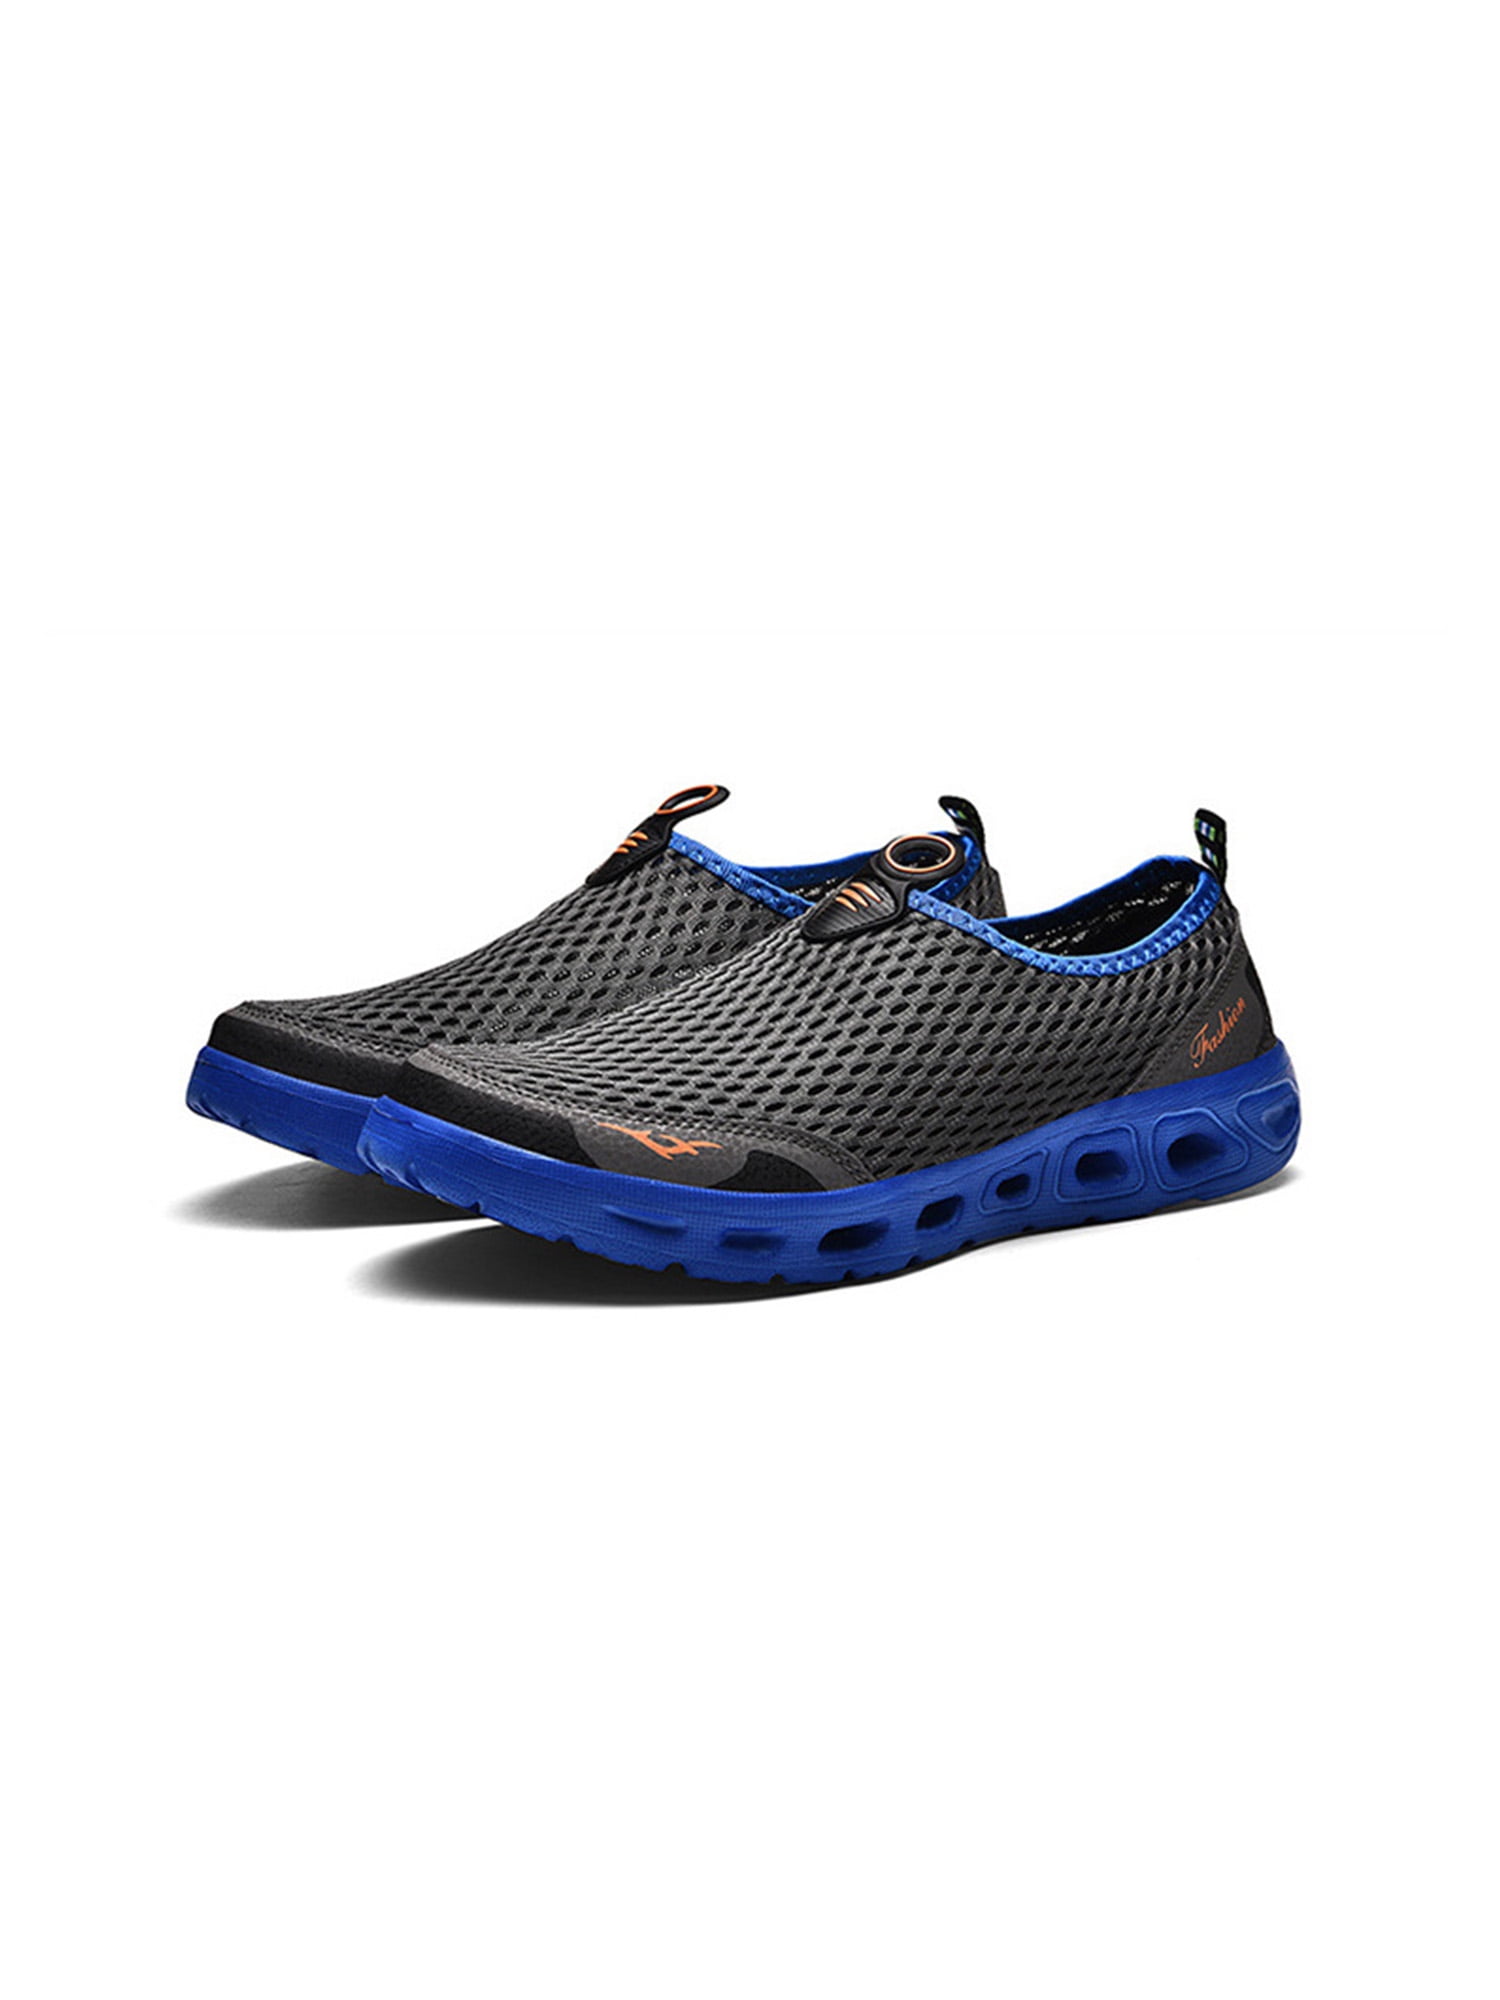 New goods listing New Water Shoes Mens Womens Beach Quick Dry Barefoot ...